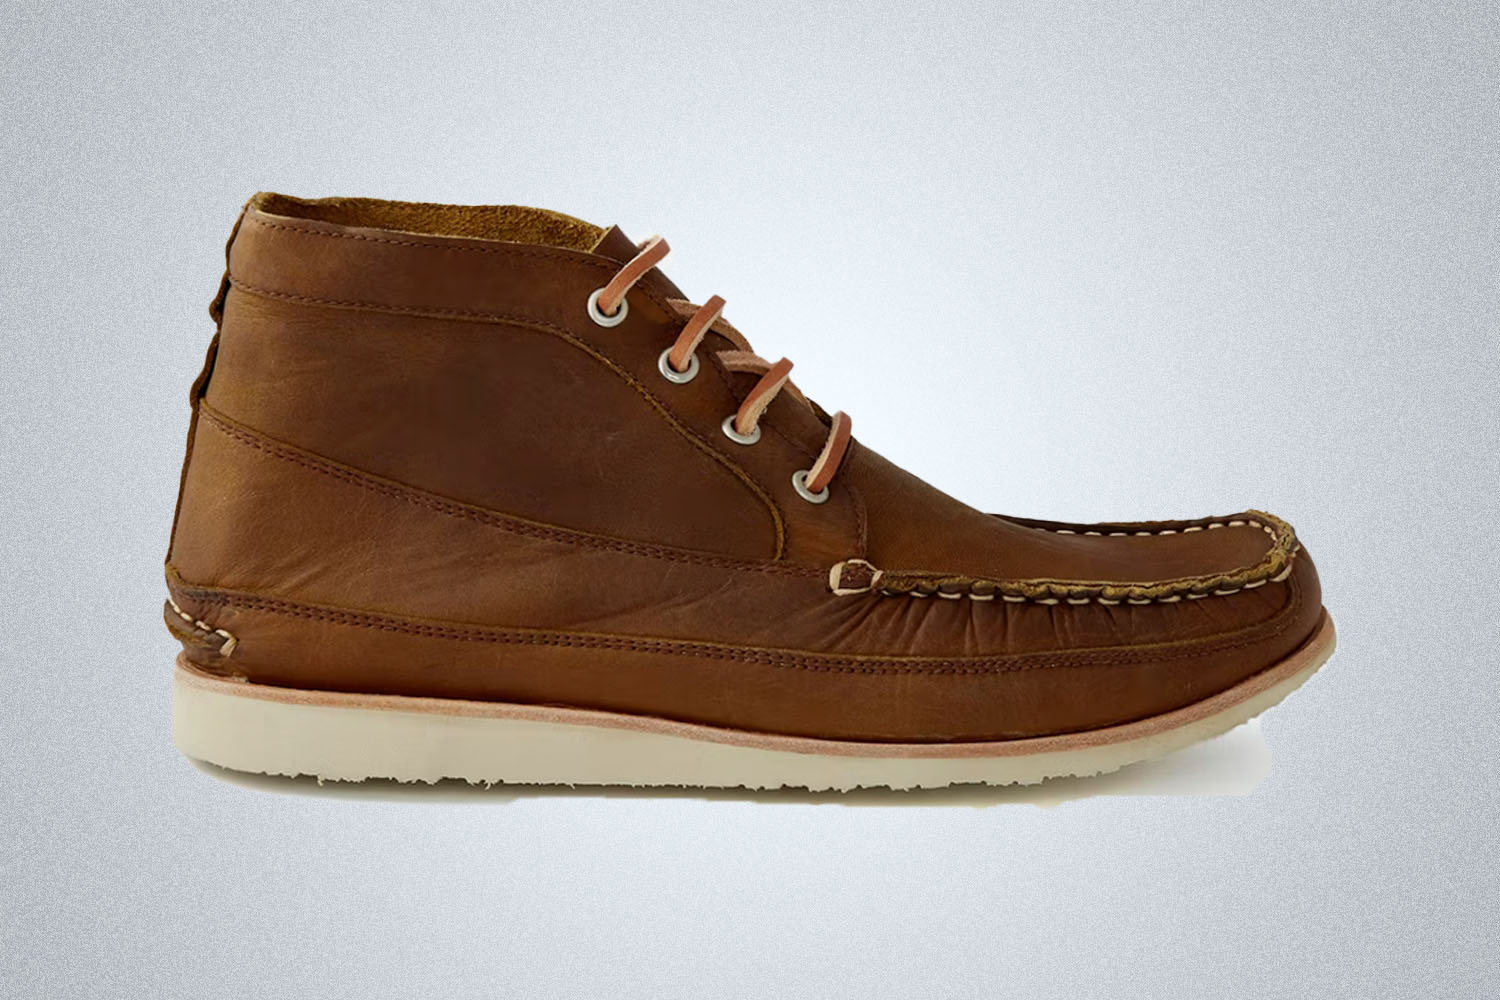 A brown leather Chukka boot from Easymoc on a grey background